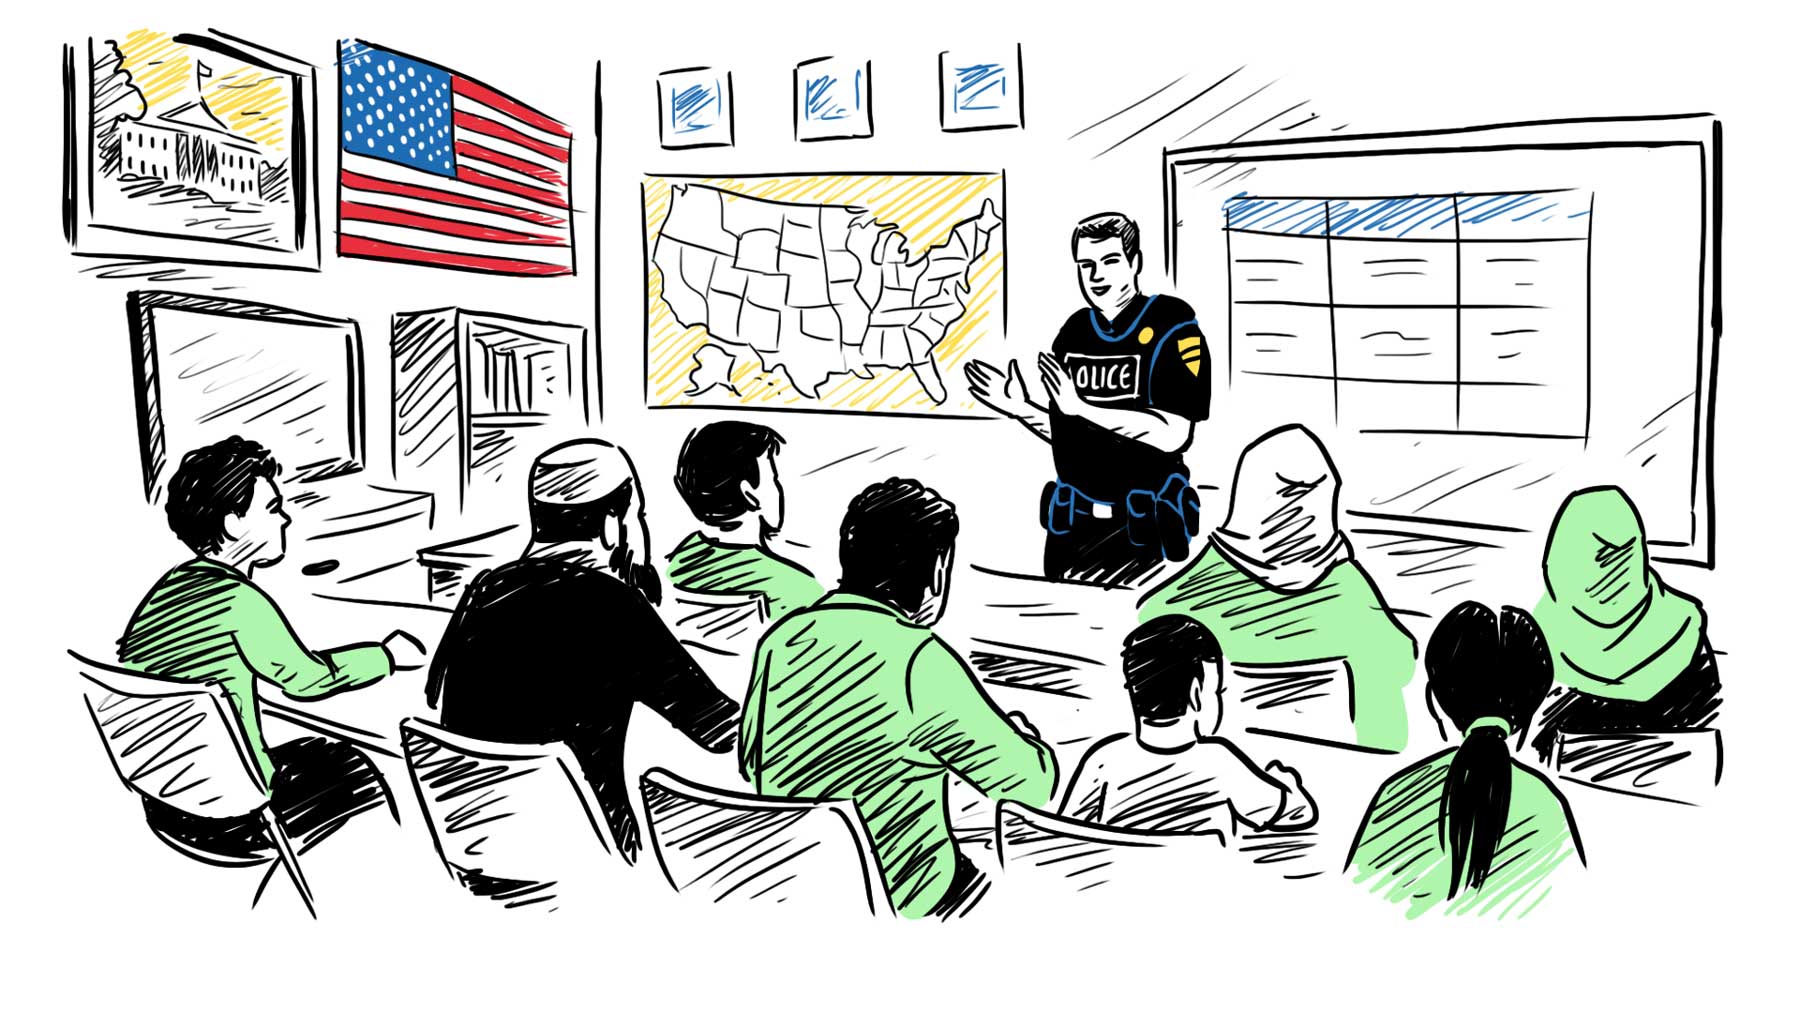 Drawn image of a police officer talking to a class of refugees